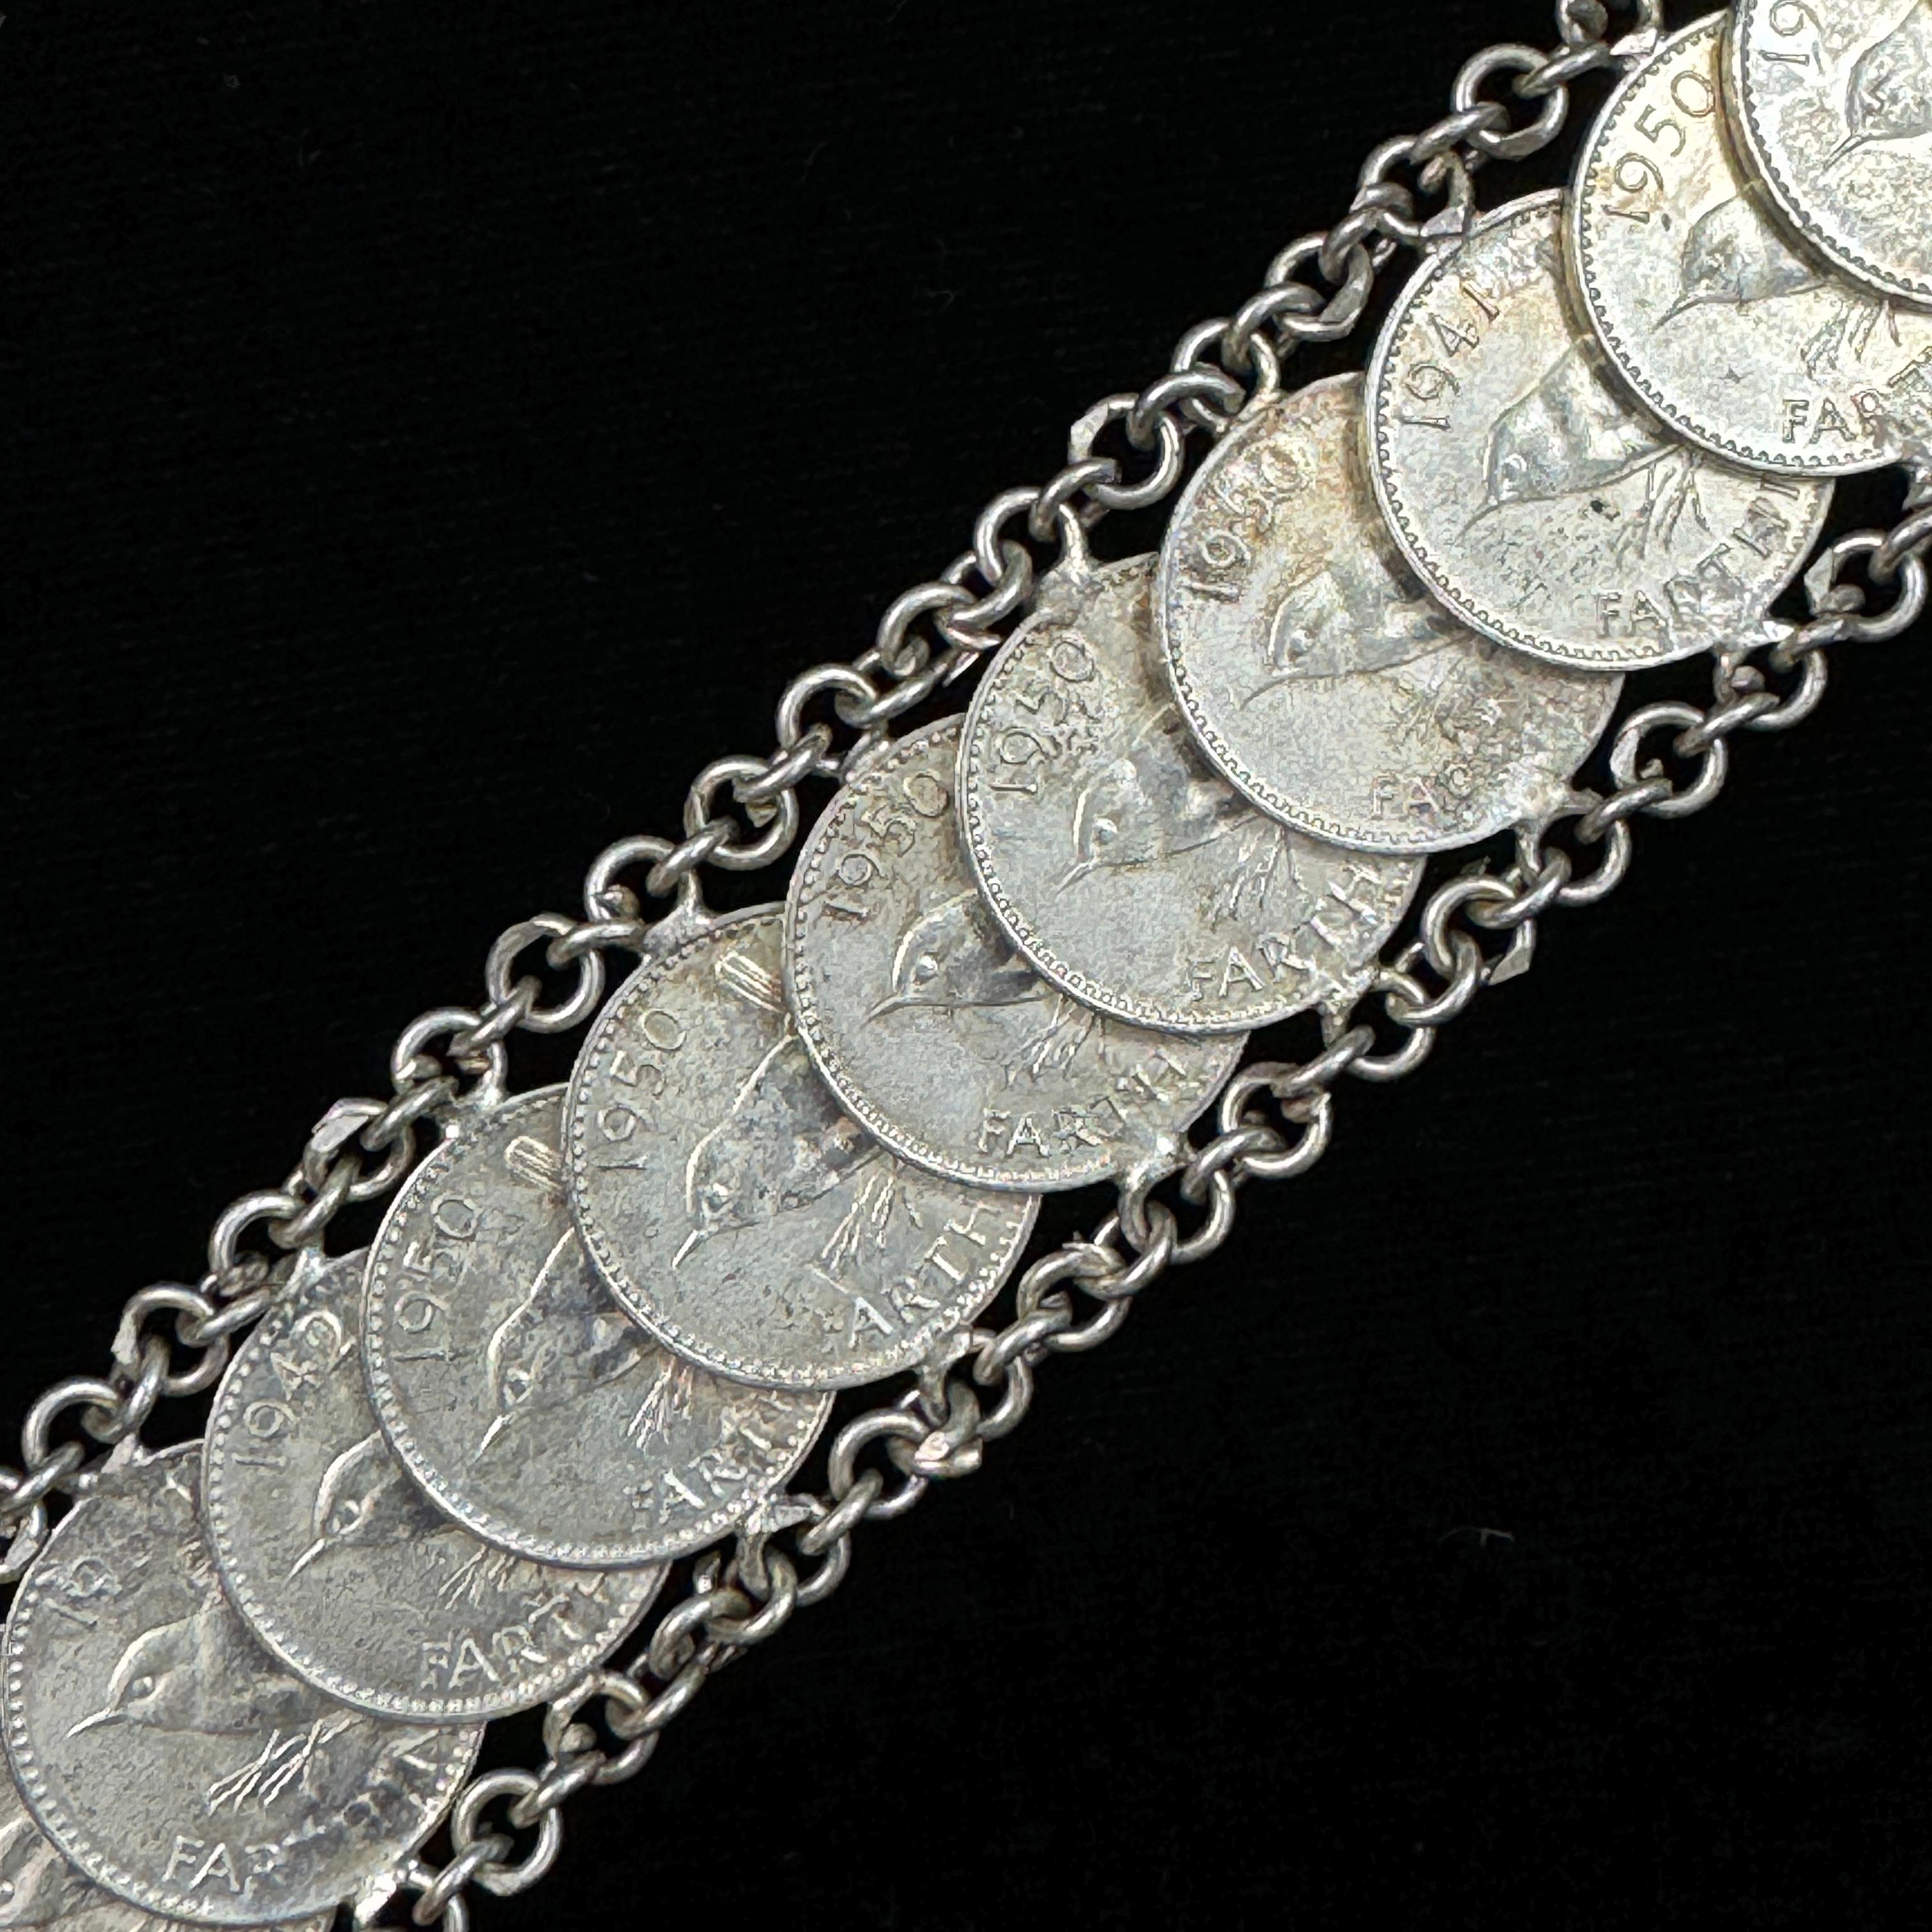 Vintage Great Britain silver-plated farthing bracelet